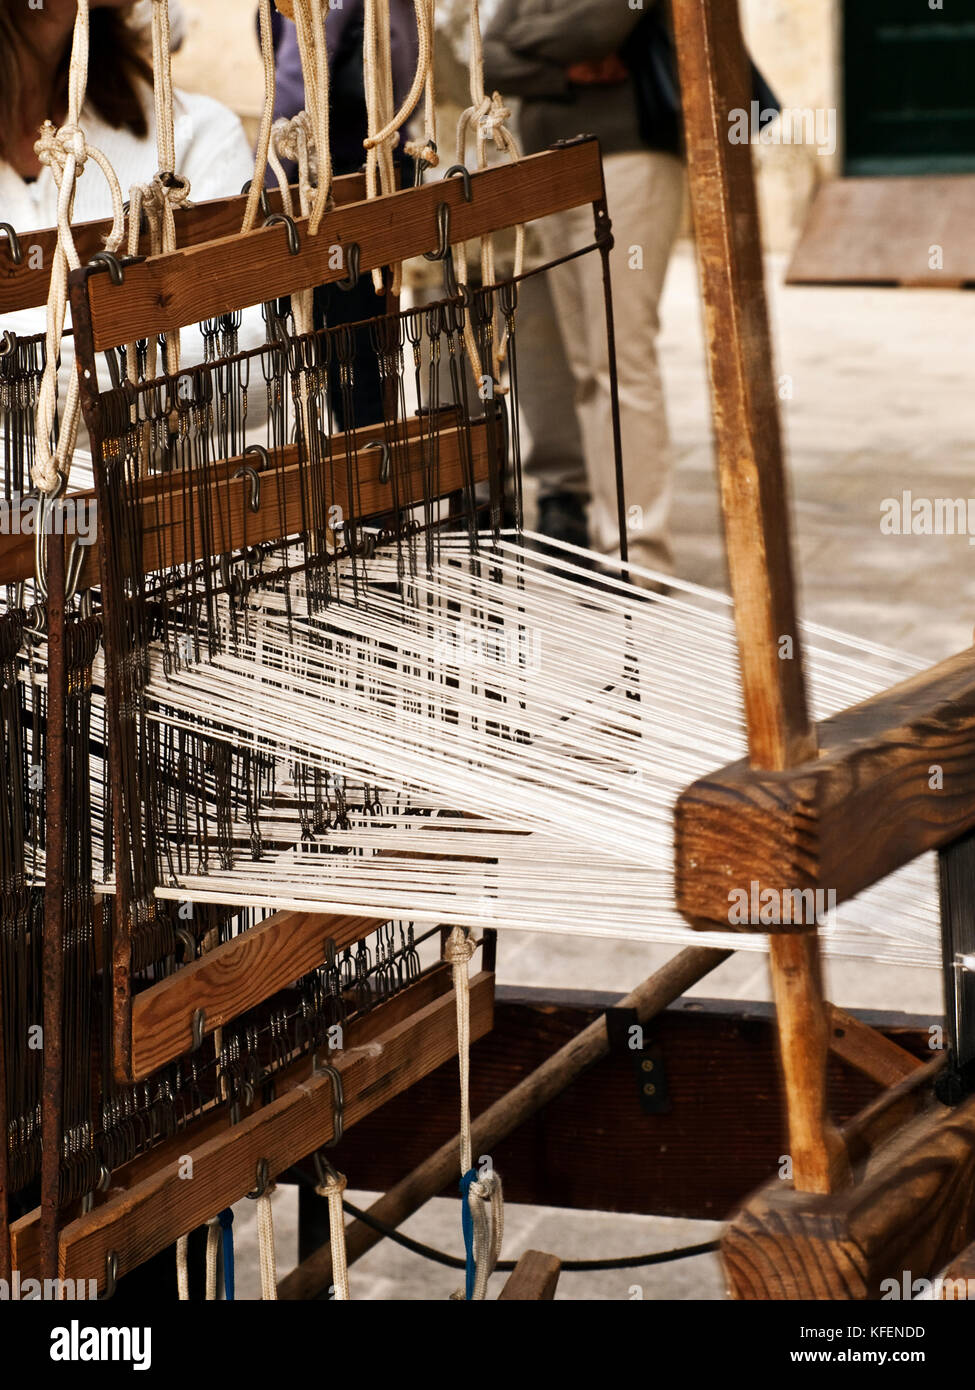 Detail of a medieval loom or carpet weaving machine Stock Photo - Alamy